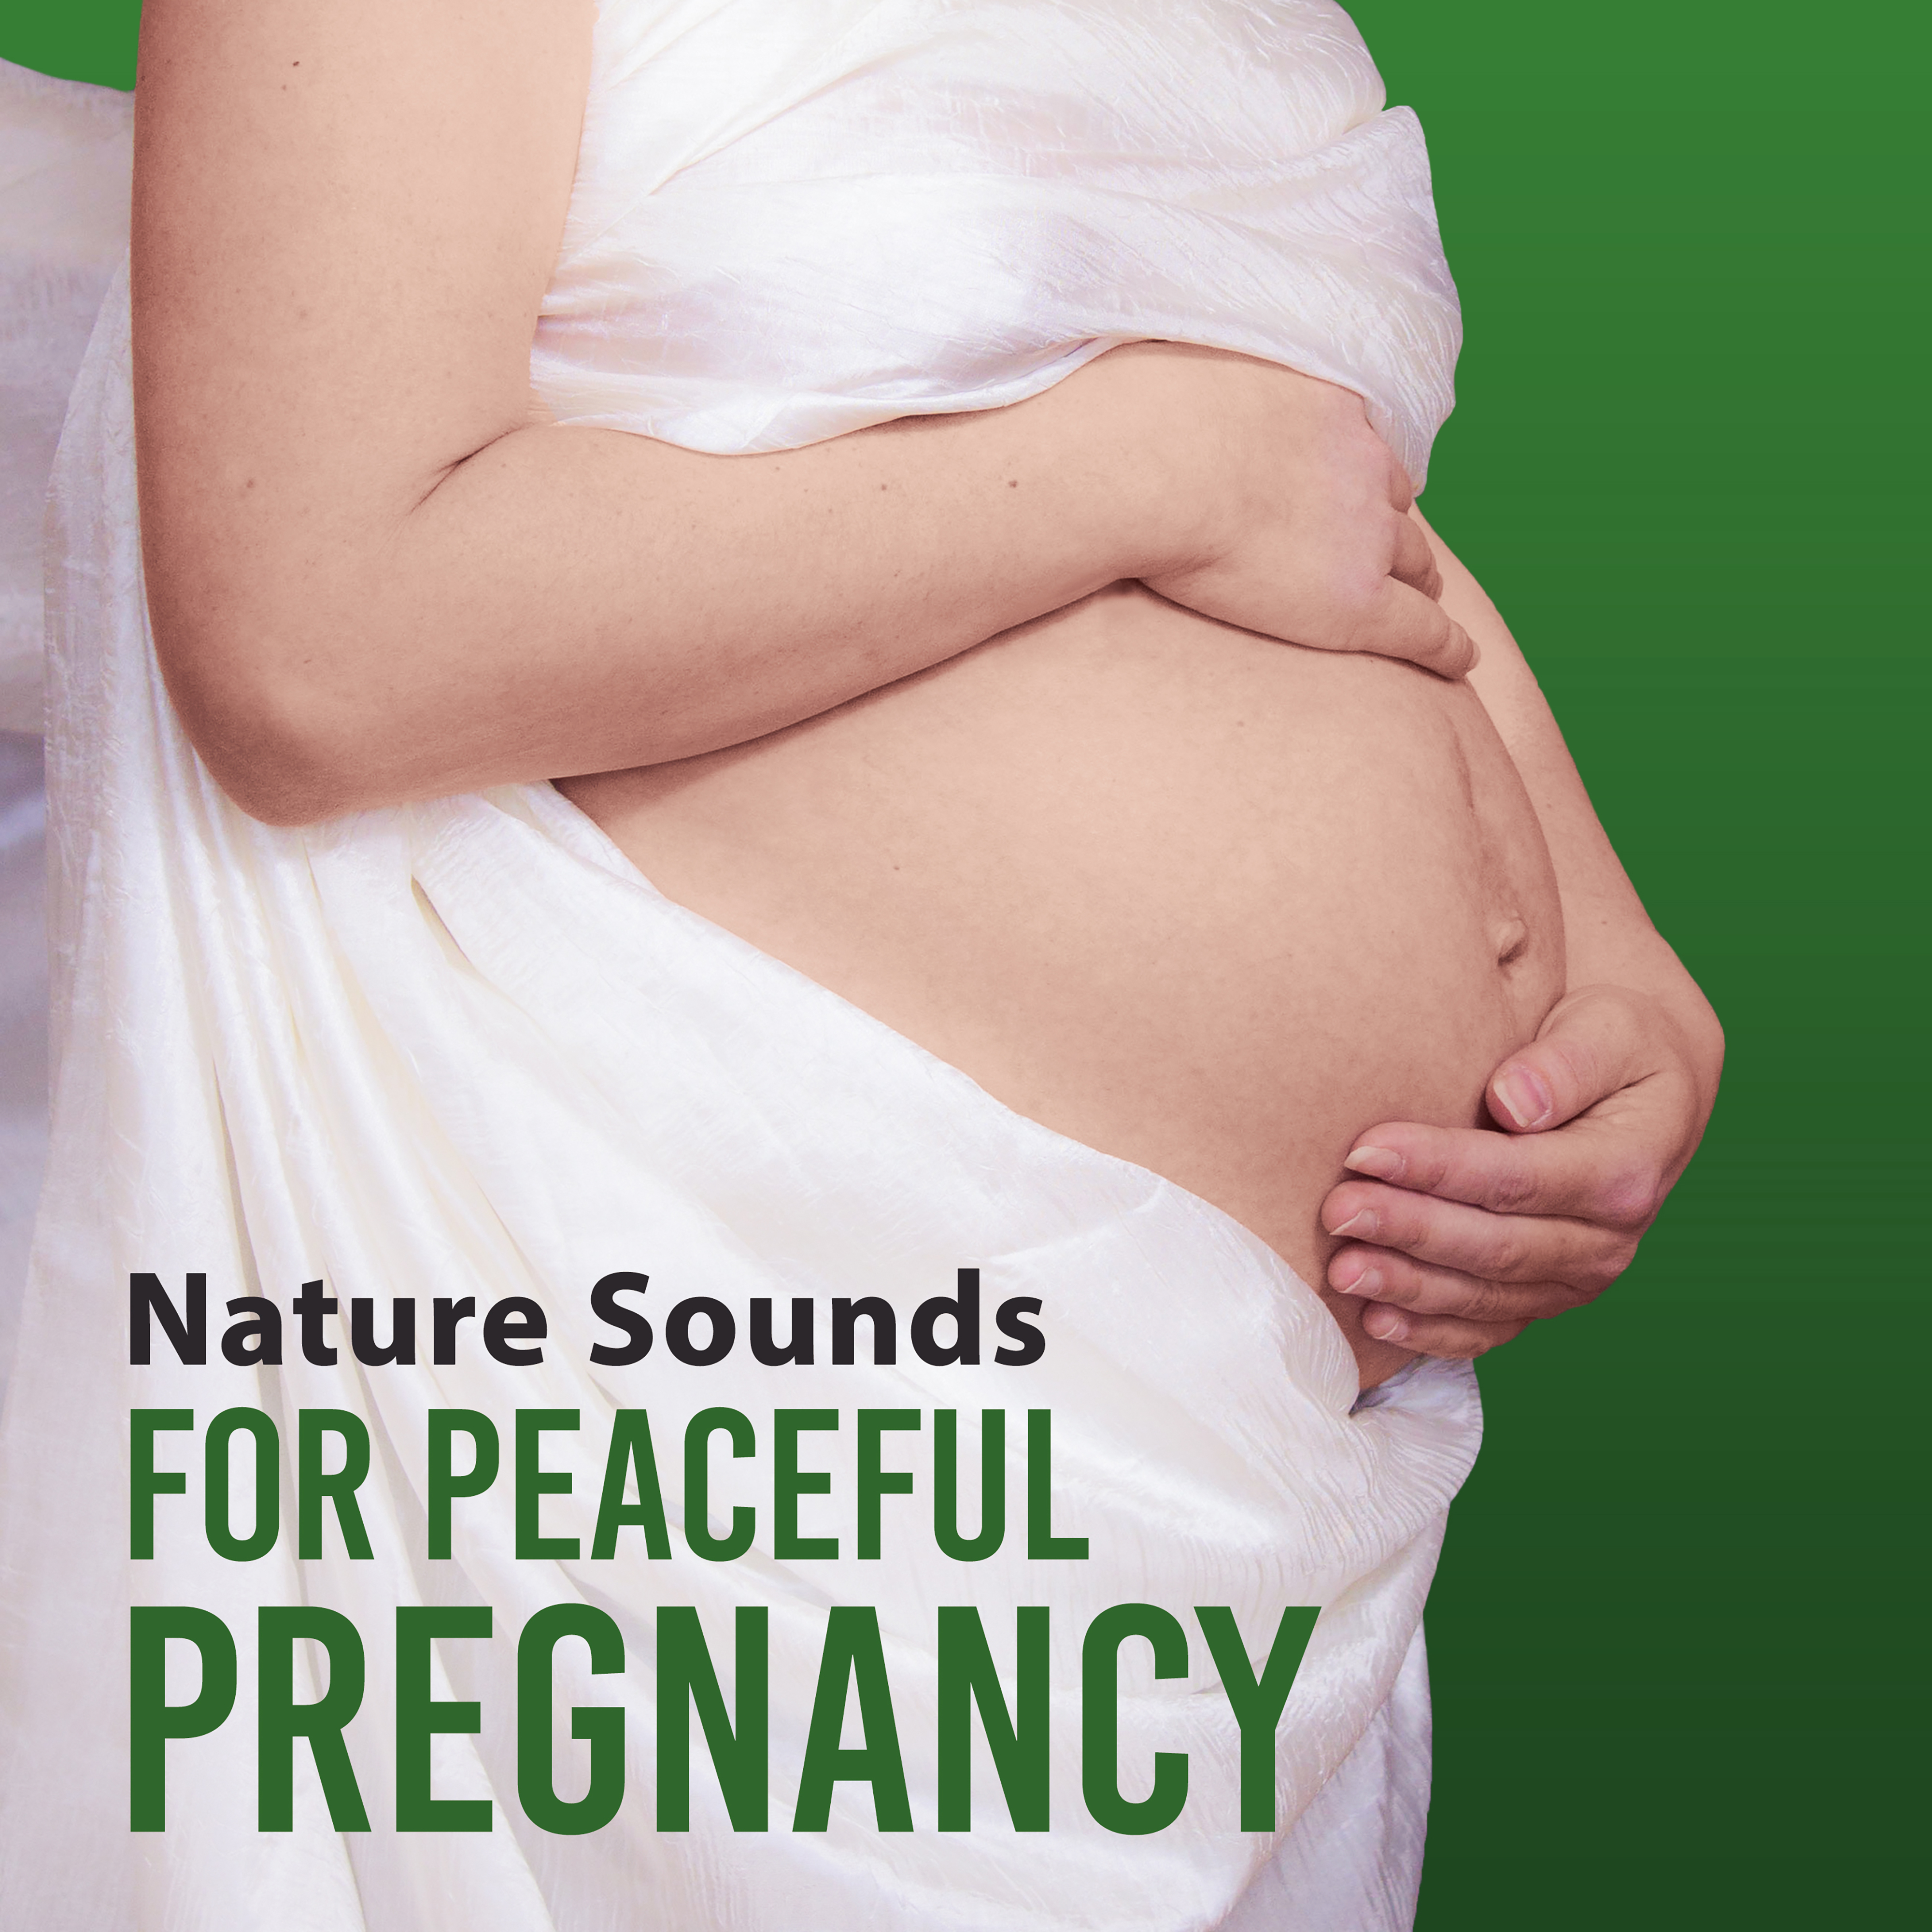 Nature Sounds for Peaceful Pregnancy – Relaxation Music, Pregnancy Yoga, Deep Rest, Calm Baby, Sleep Music for Future Mom